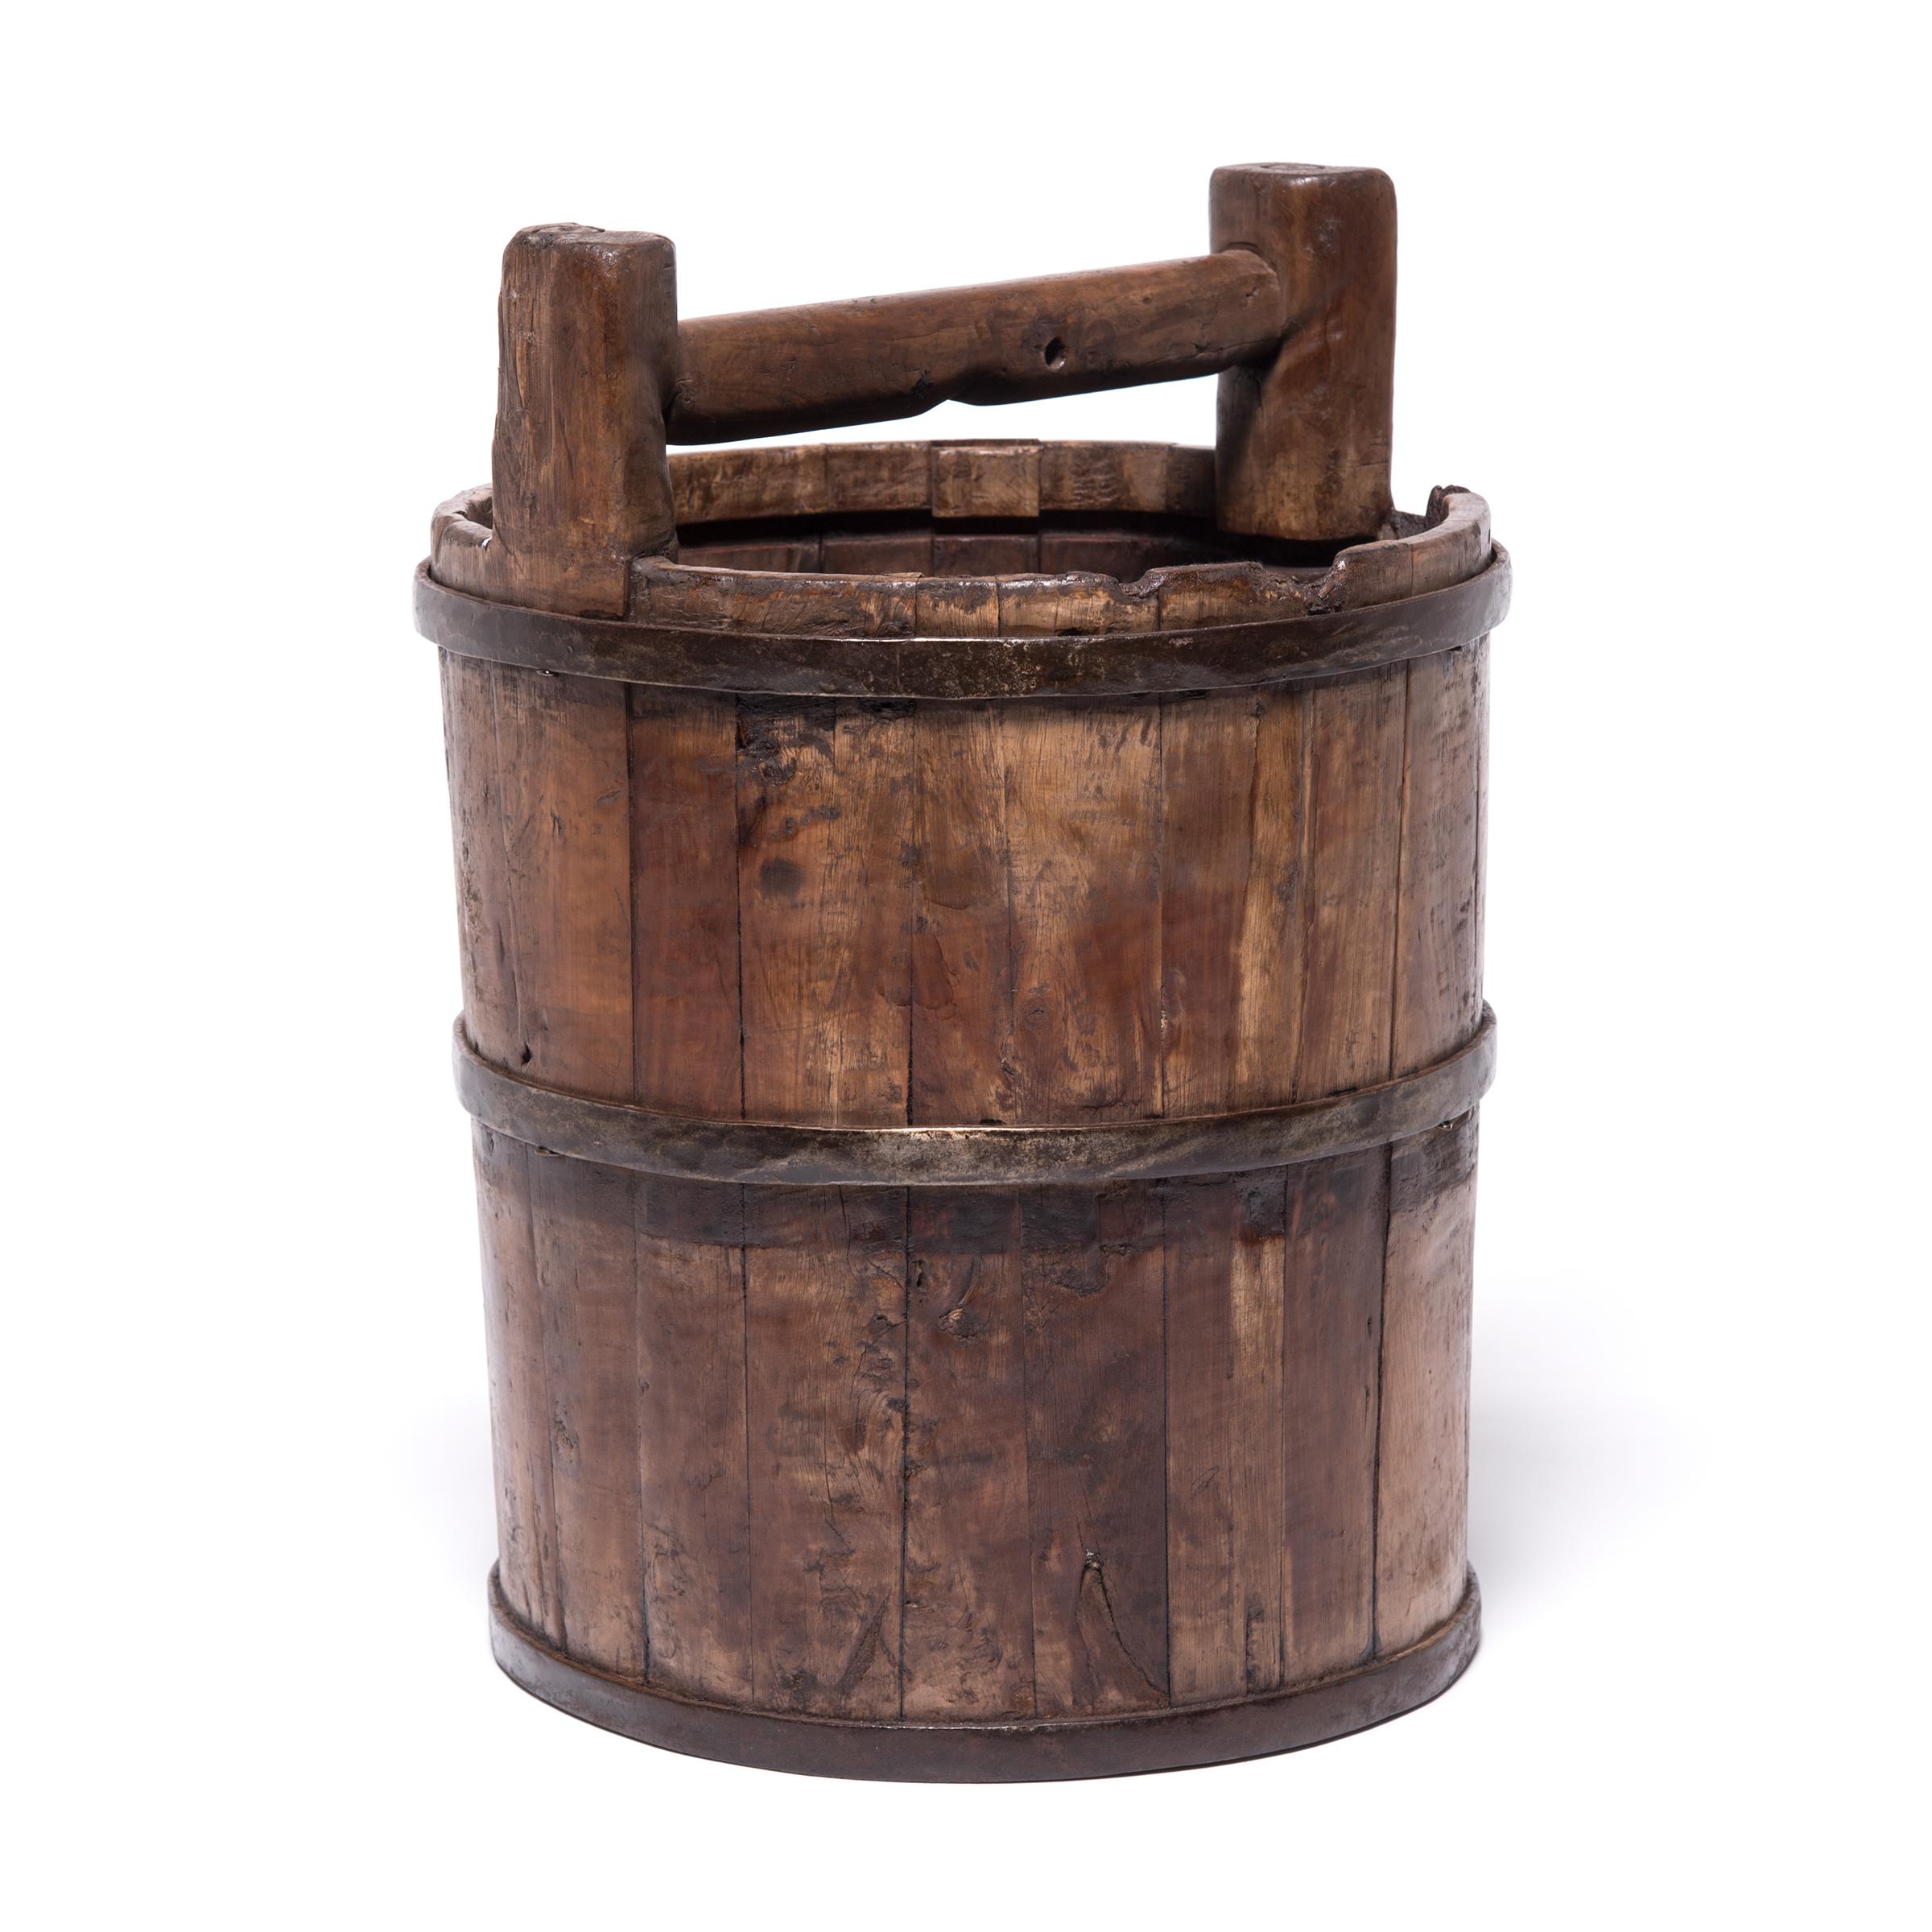 This vintage water bucket conjures up images of water-bearing figures illustrated in painted scrolls. Beautifully aged with a warm patina, this Qing-dynasty bucket draws attention to the ingenuity of its manufacture, consisting of staves of cypress